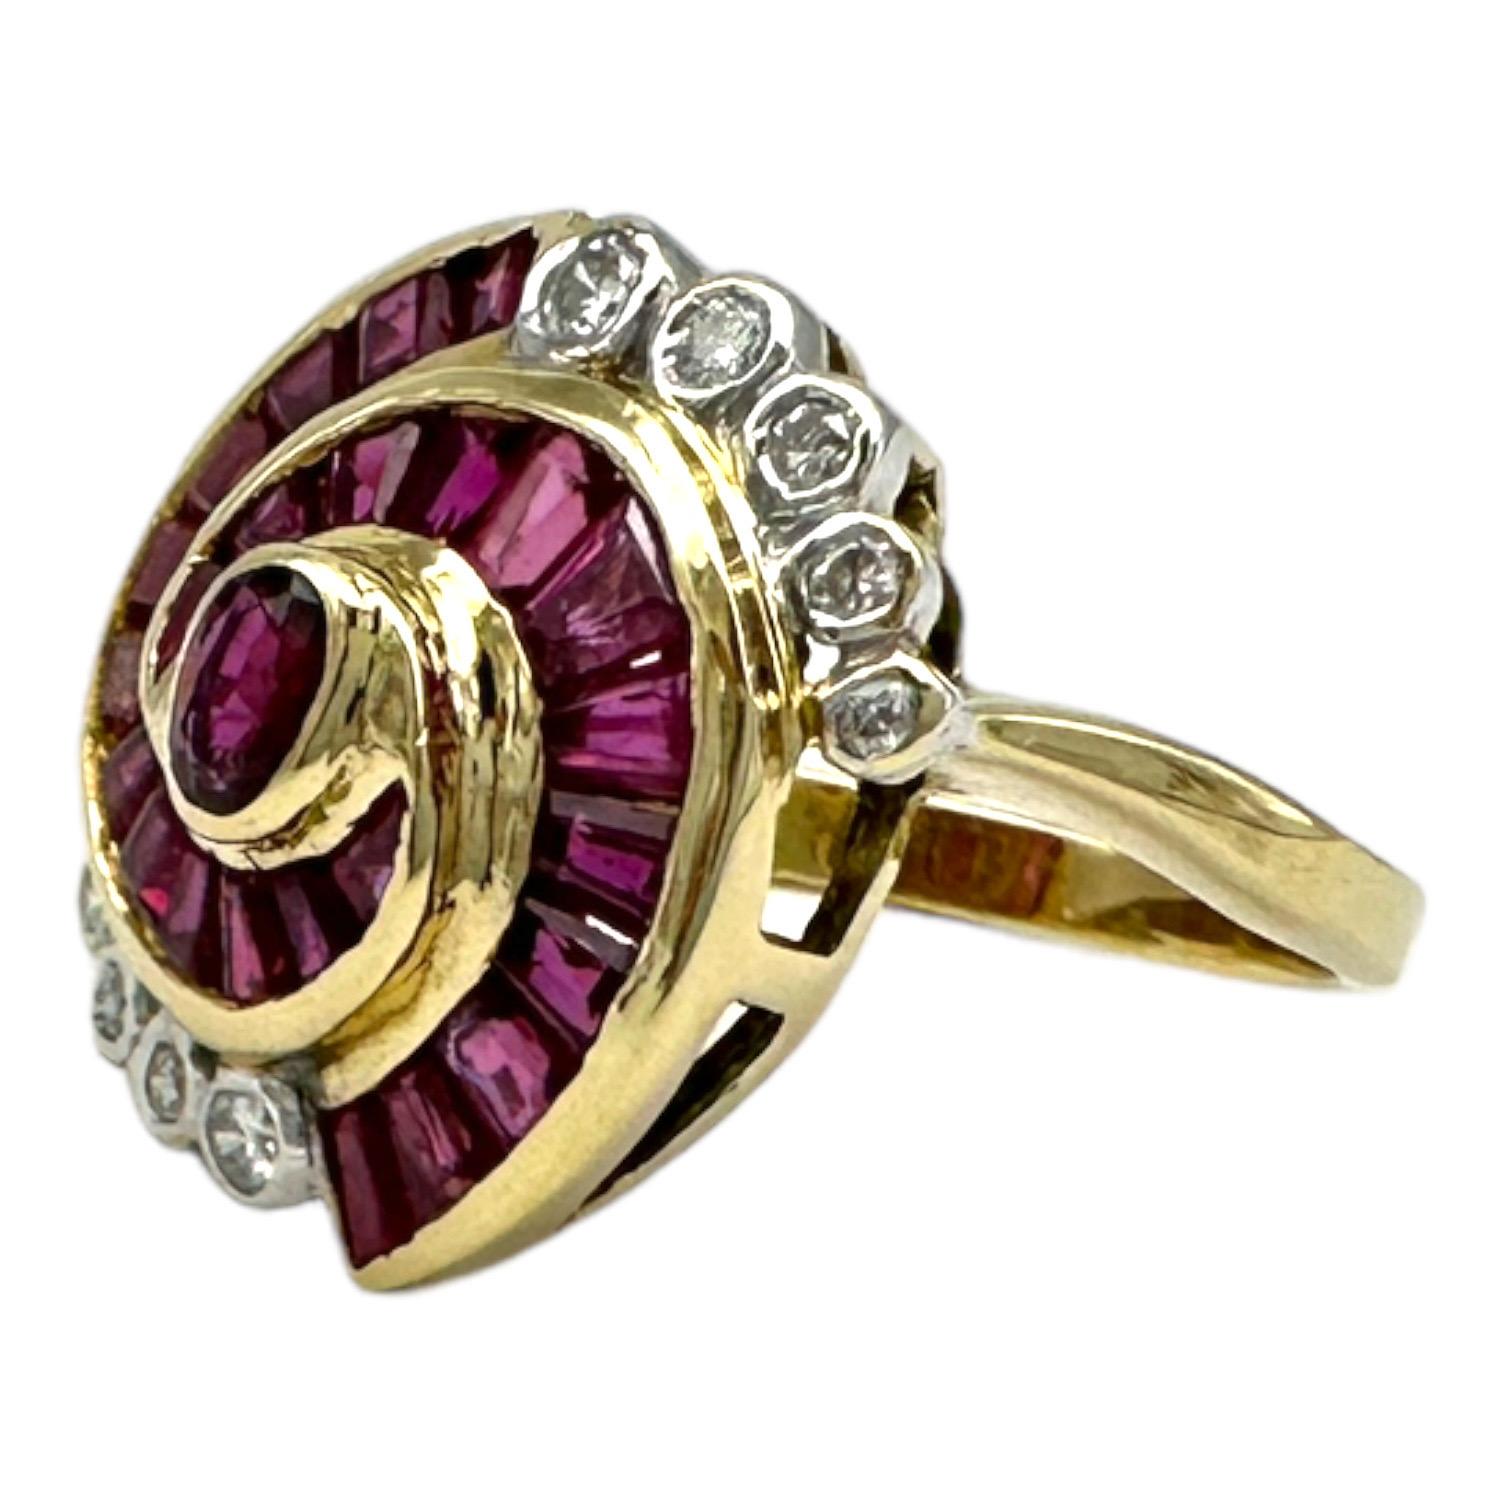 14 karat yellow gold ruby and diamond cocktail ring is 16 mm in diameter and has beautiful red-colored rubies. A swirl of baguette-cut rubies circles a centered oval-shaped ruby. Twenty-two rubies weigh an estimated 1.50 carats. The ring's outer